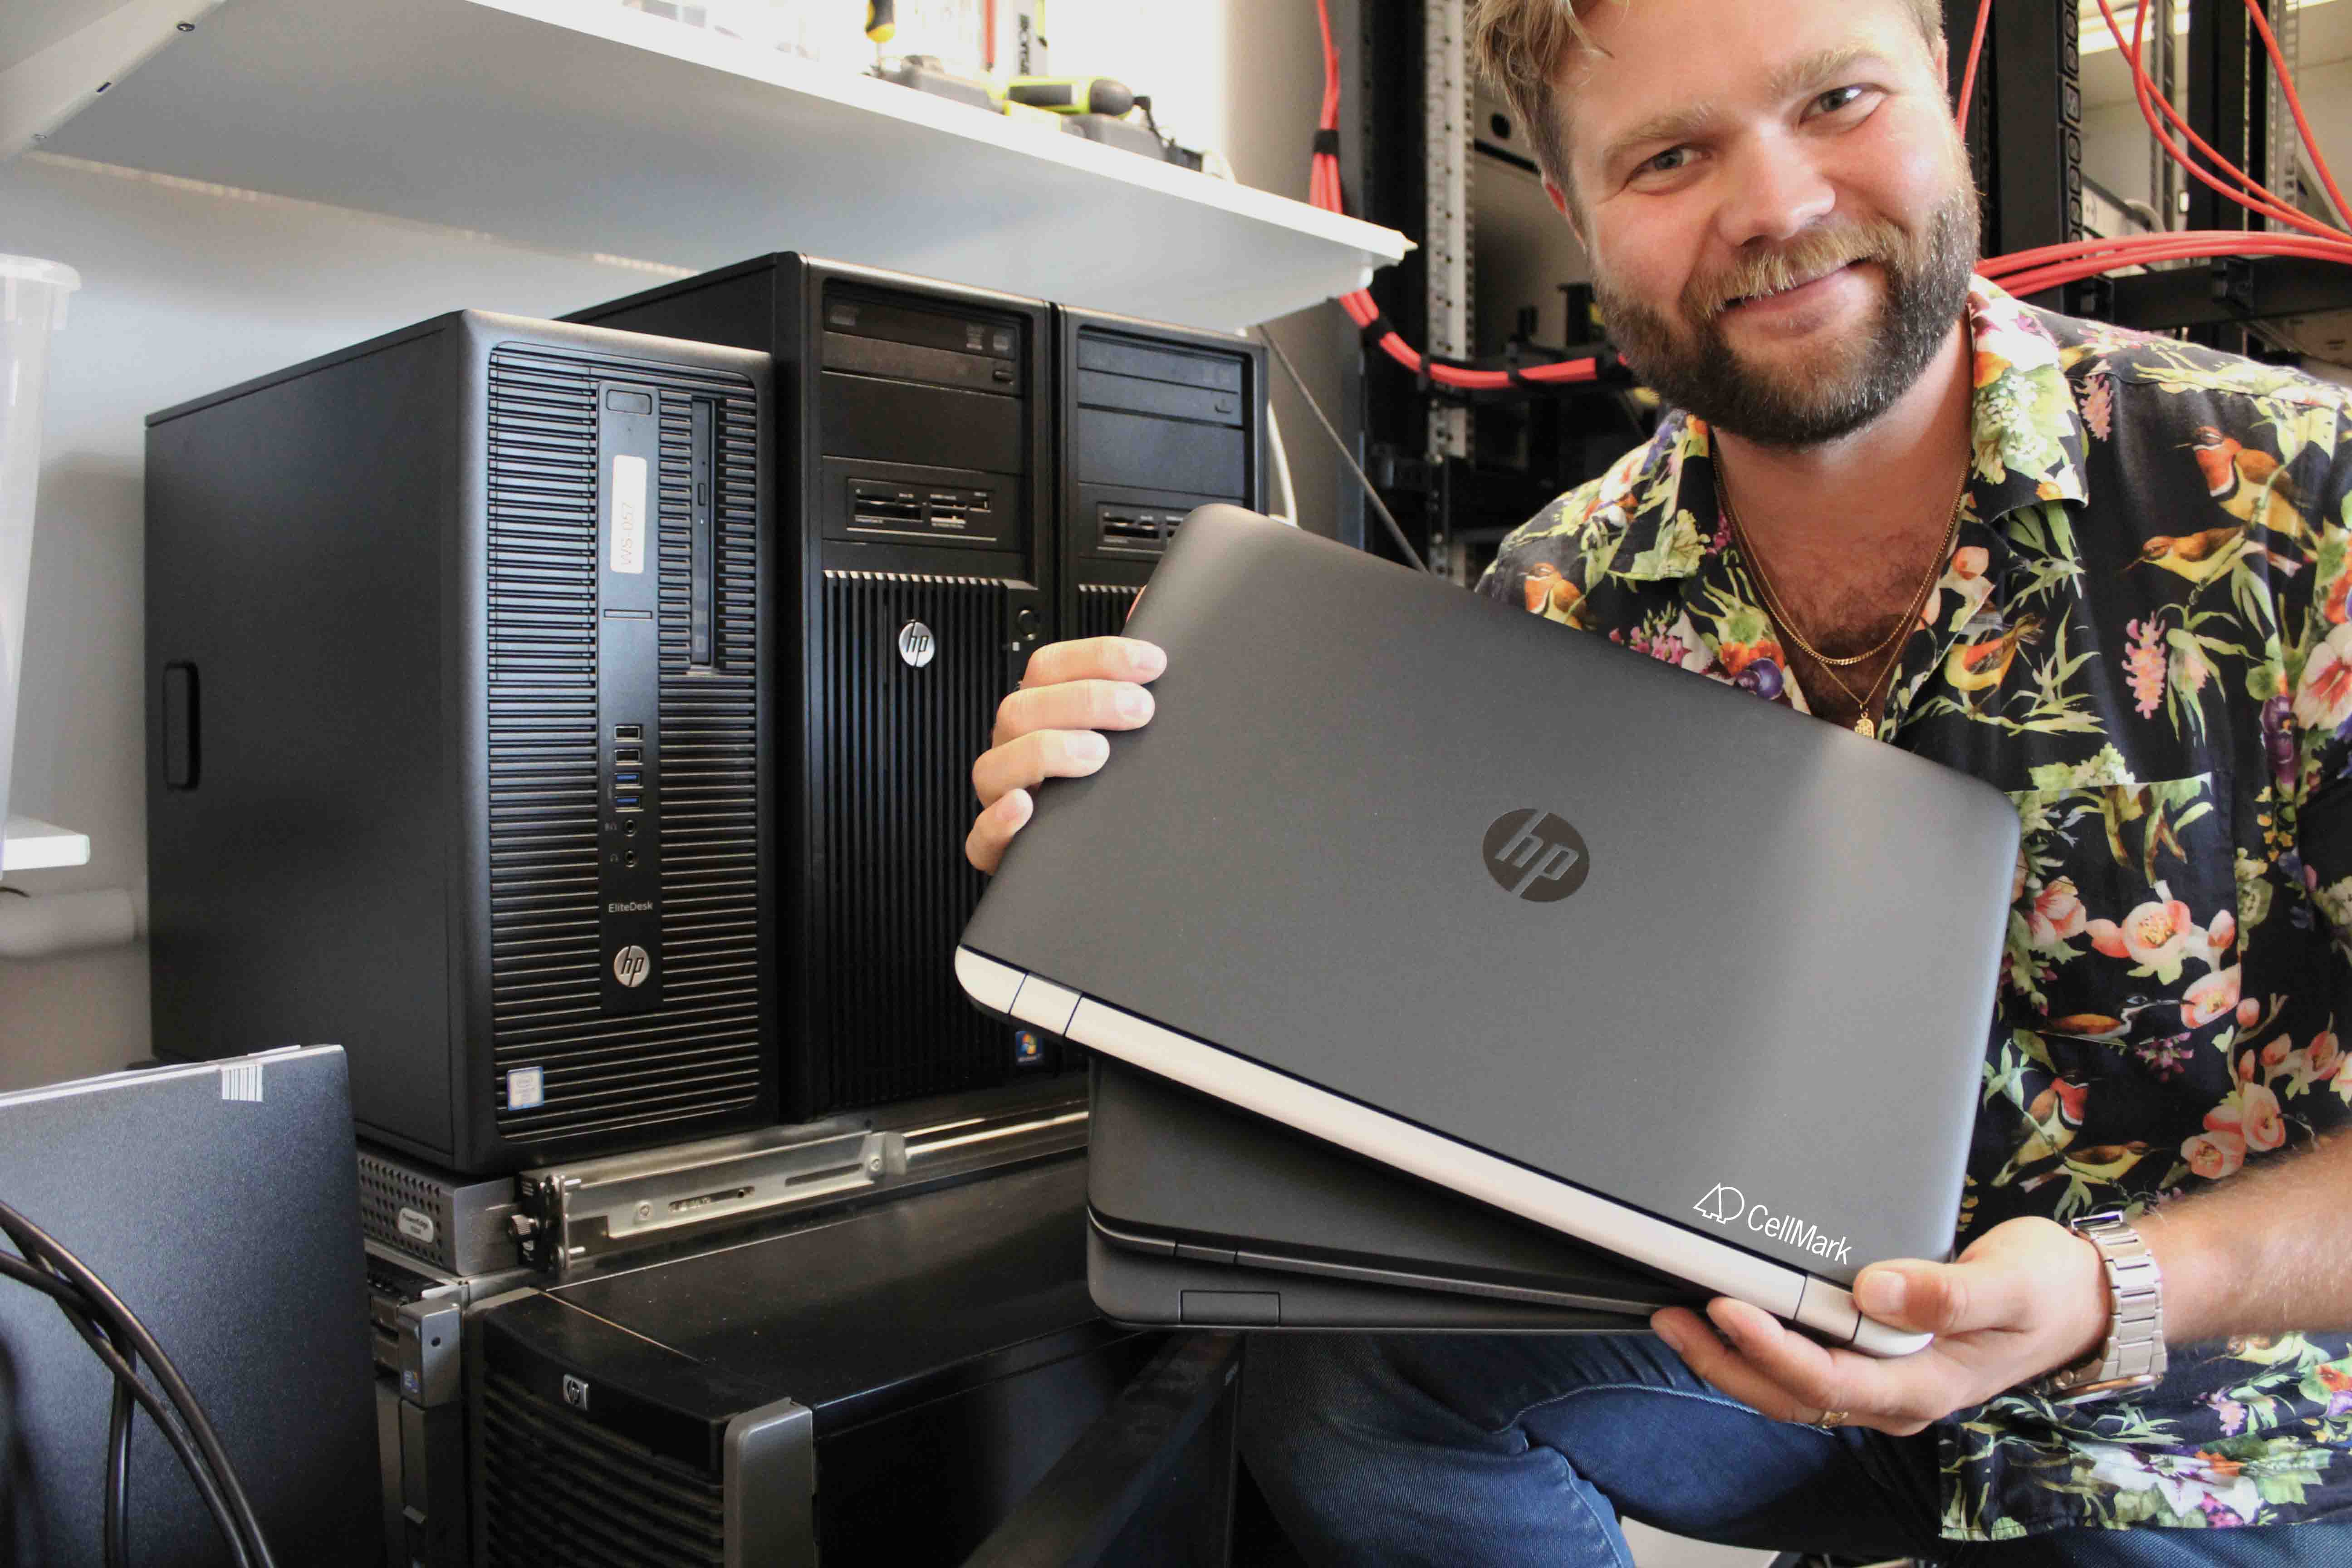 a bearded man is holding three laptops